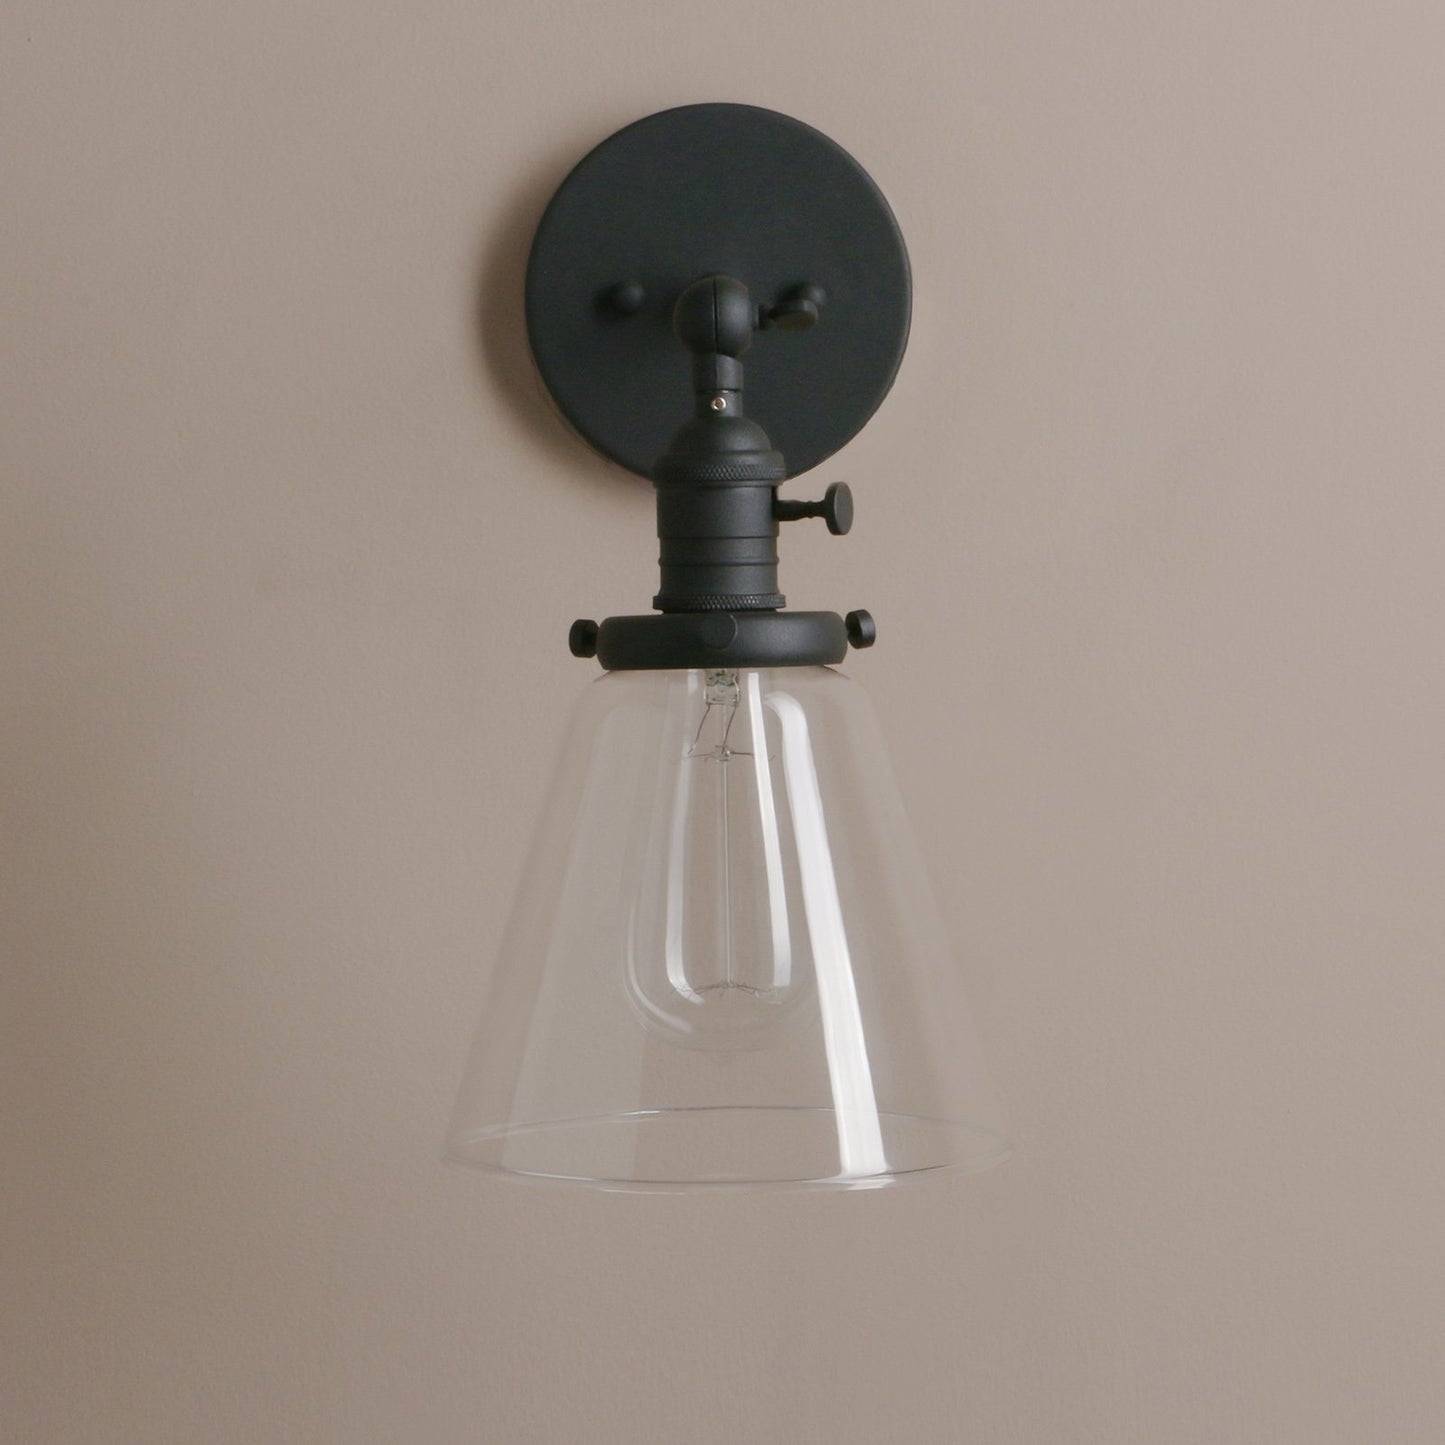 Industrial Wall Sconce Lighting Single Brass Sconce